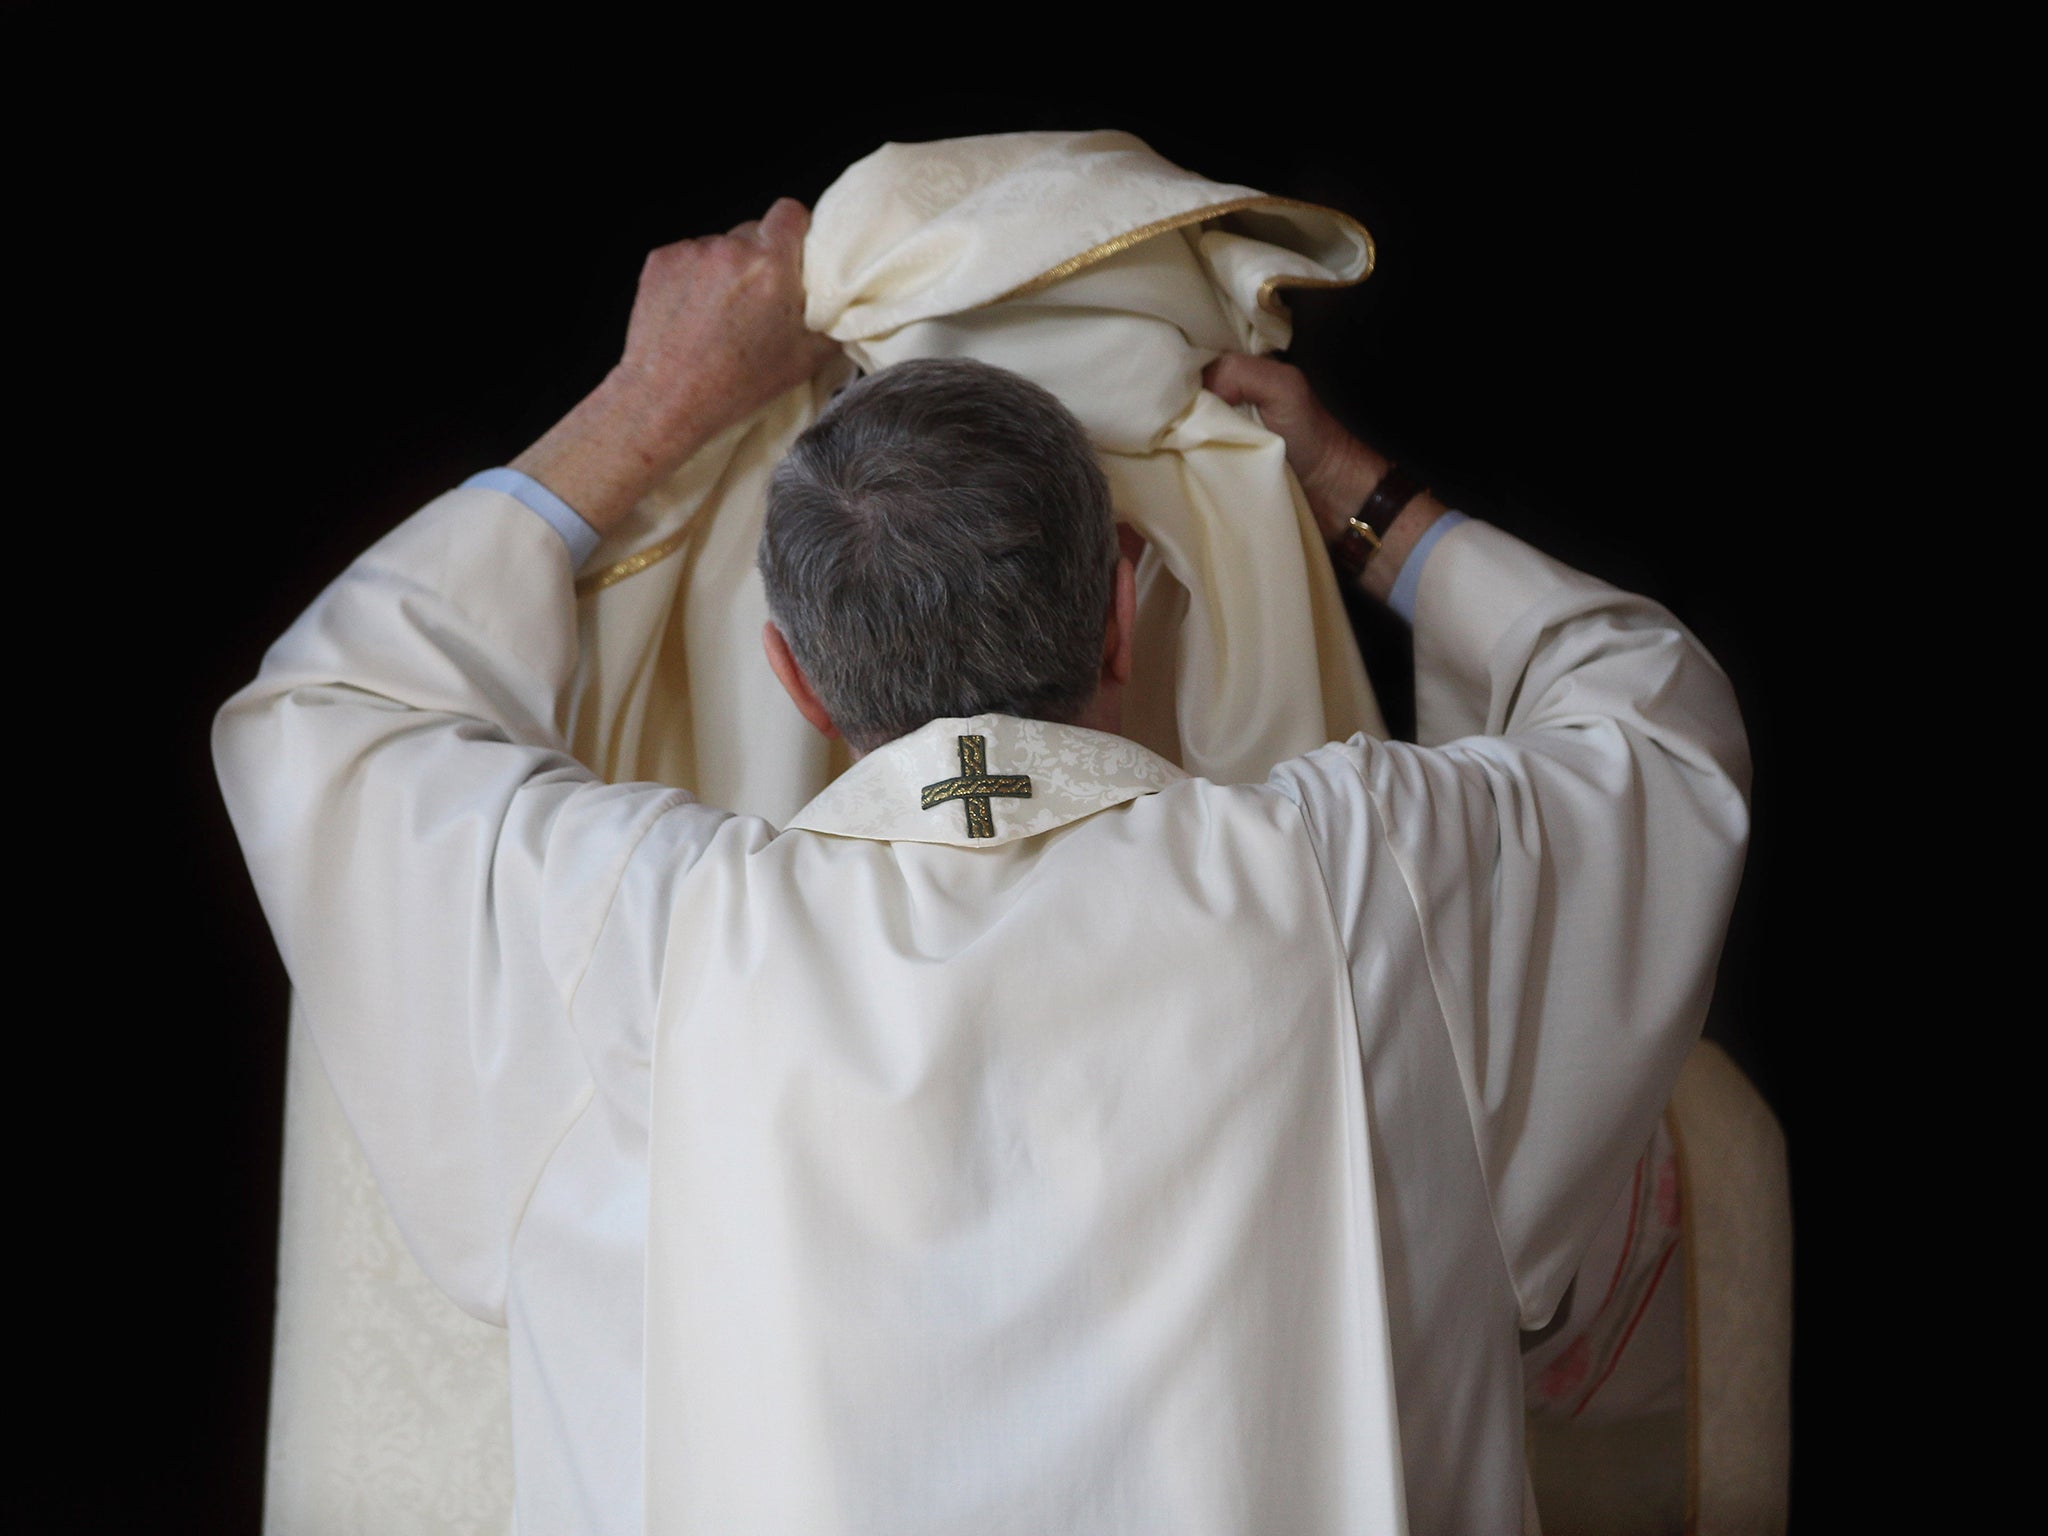 Currently, priests can be given a life ban from ministry, but there is no way to strip them of the status of ordained clergy